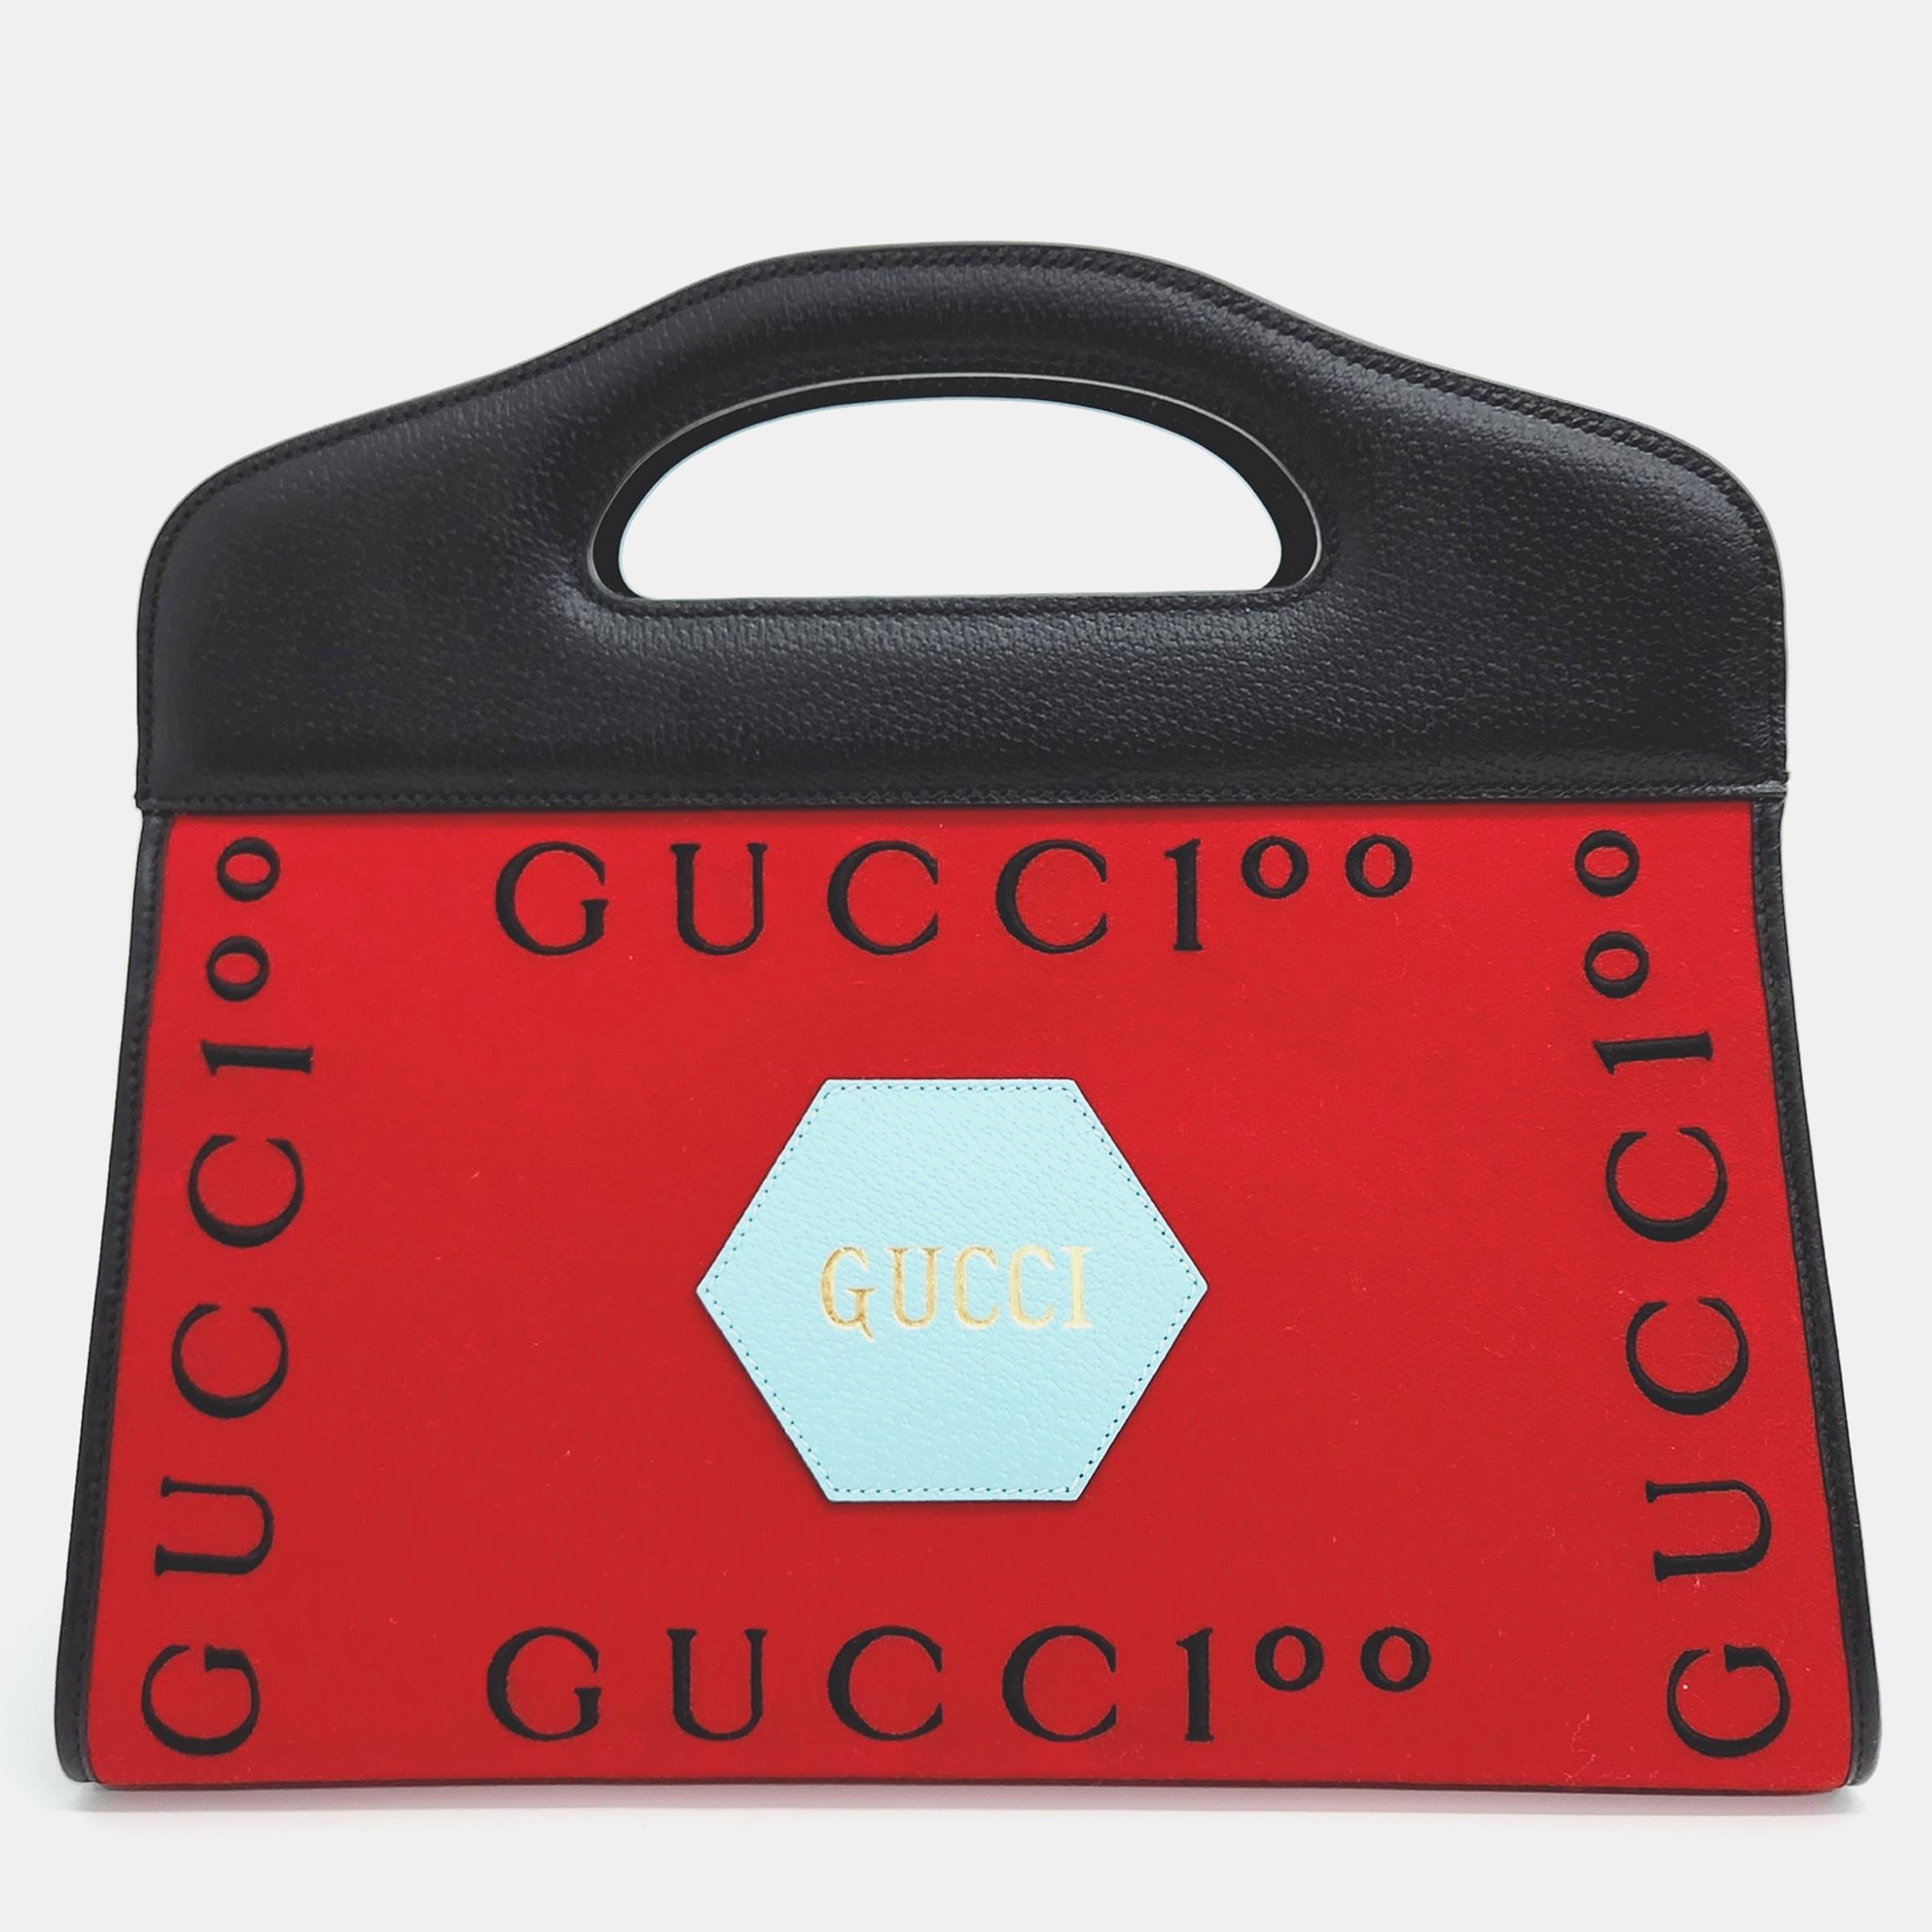 Gucci red leather 100th anniversary tote bag